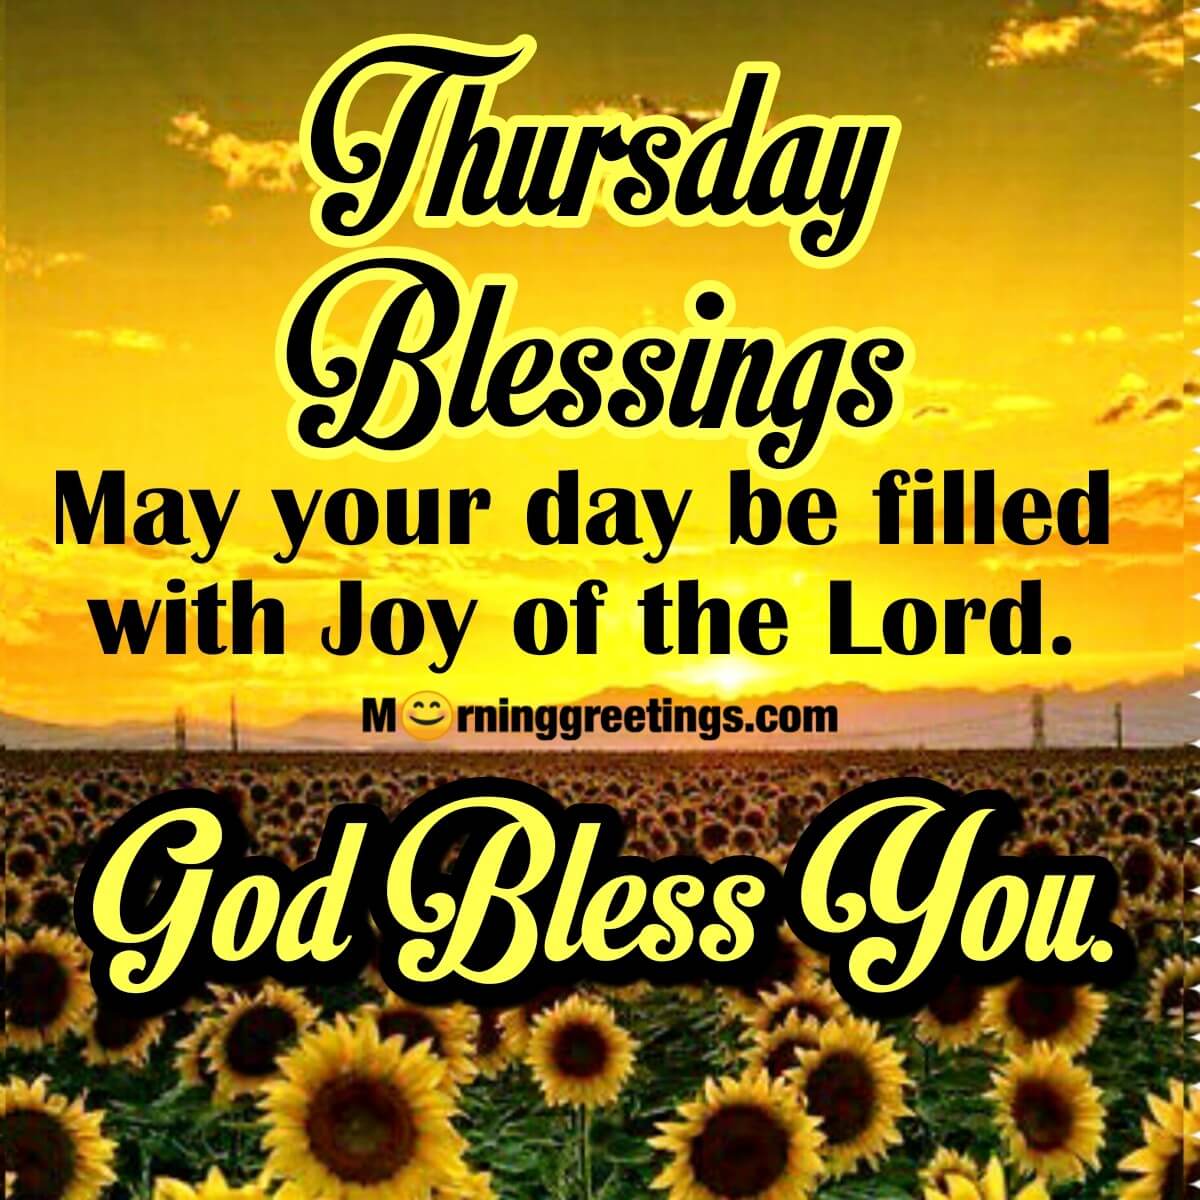 50 Best Thursday Morning Blessings And Wishes Morning Greetings